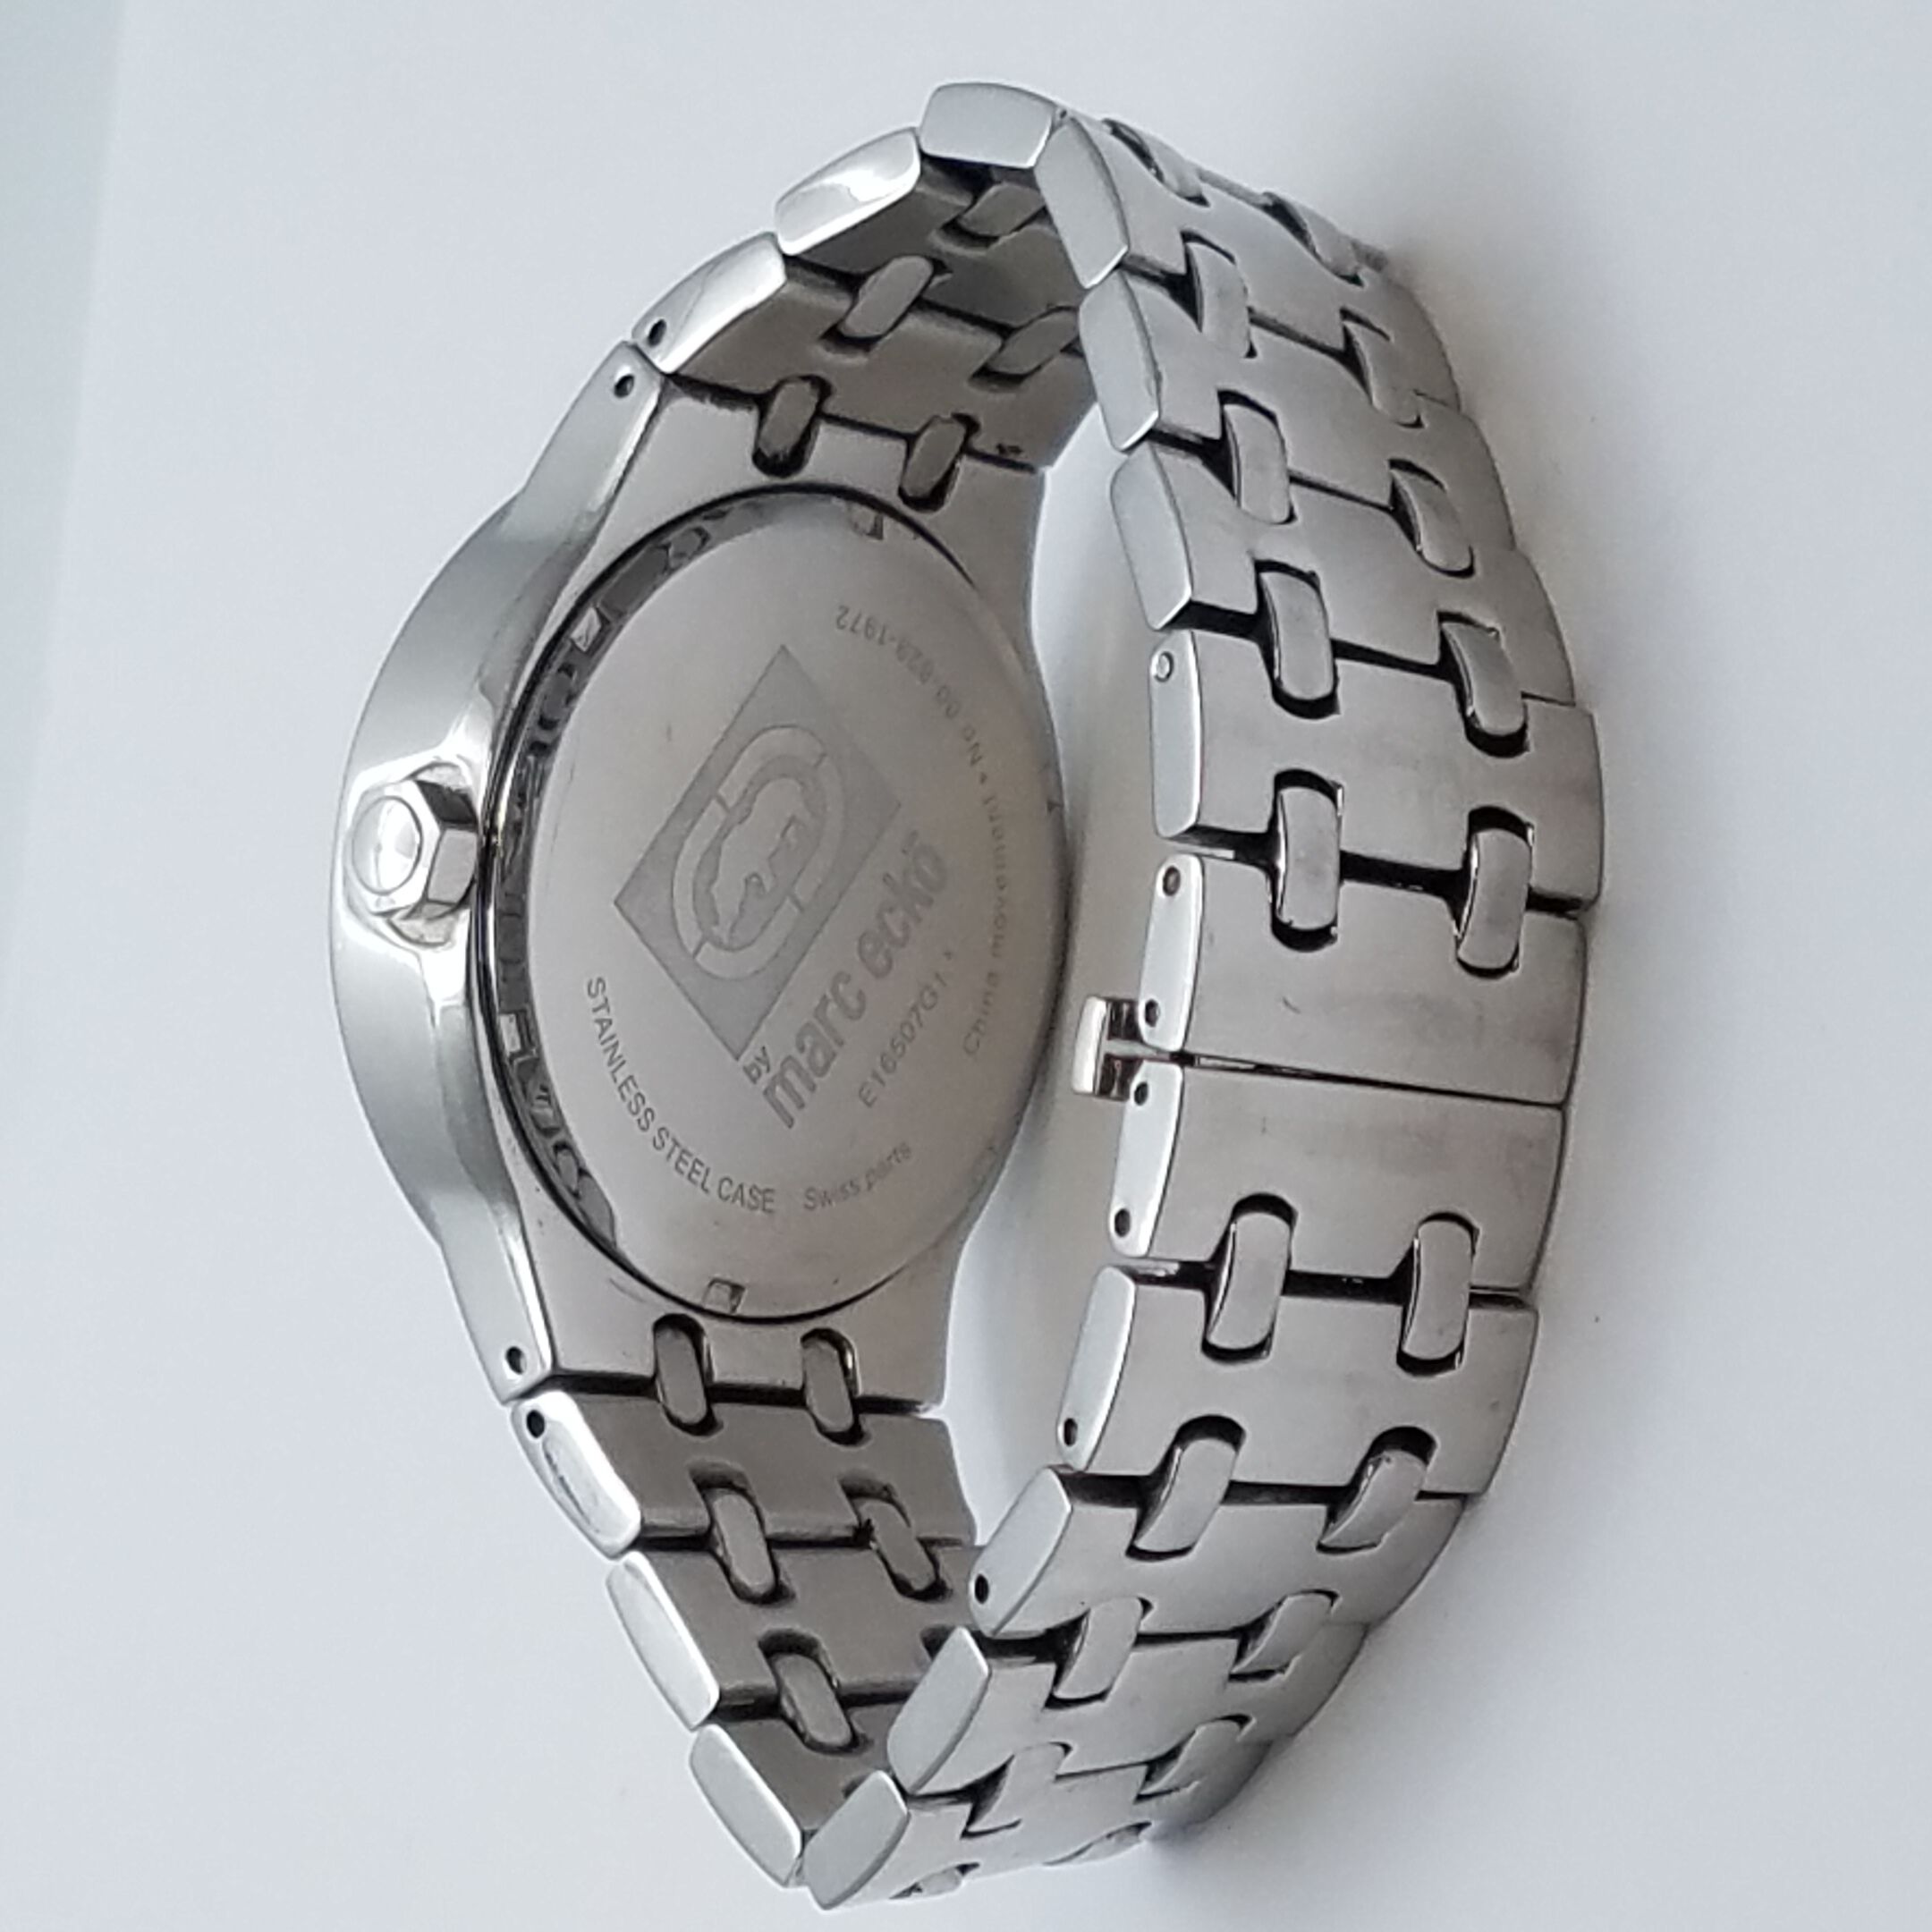 Marc Ecko] How much is this watch worth? : r/Watches